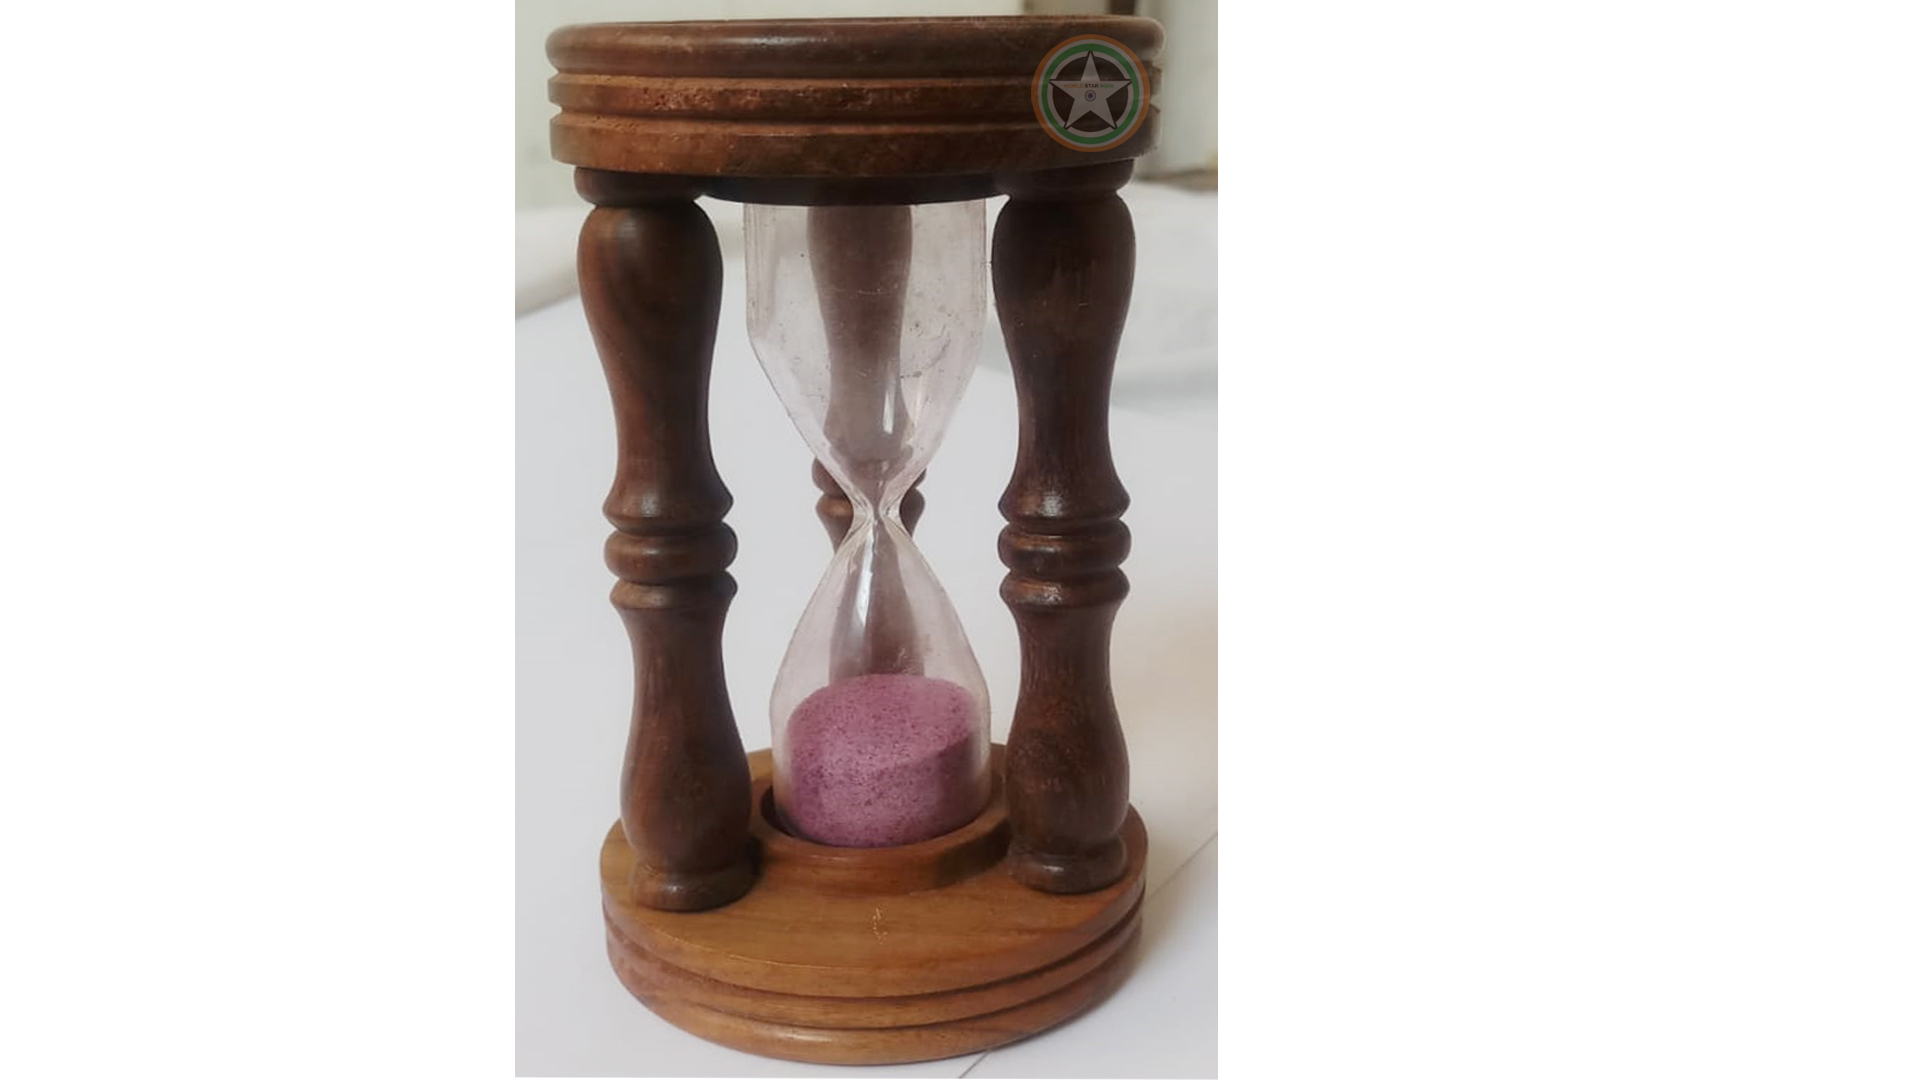 WORLD STAR INDIA Wooden Sand Timer | Sandglass Clock | Sand Watch | Beautiful Design with Base Ideal for Exercise, Antique Gifted Item Tea Making Antique Nautical Office Décorative from World Star India